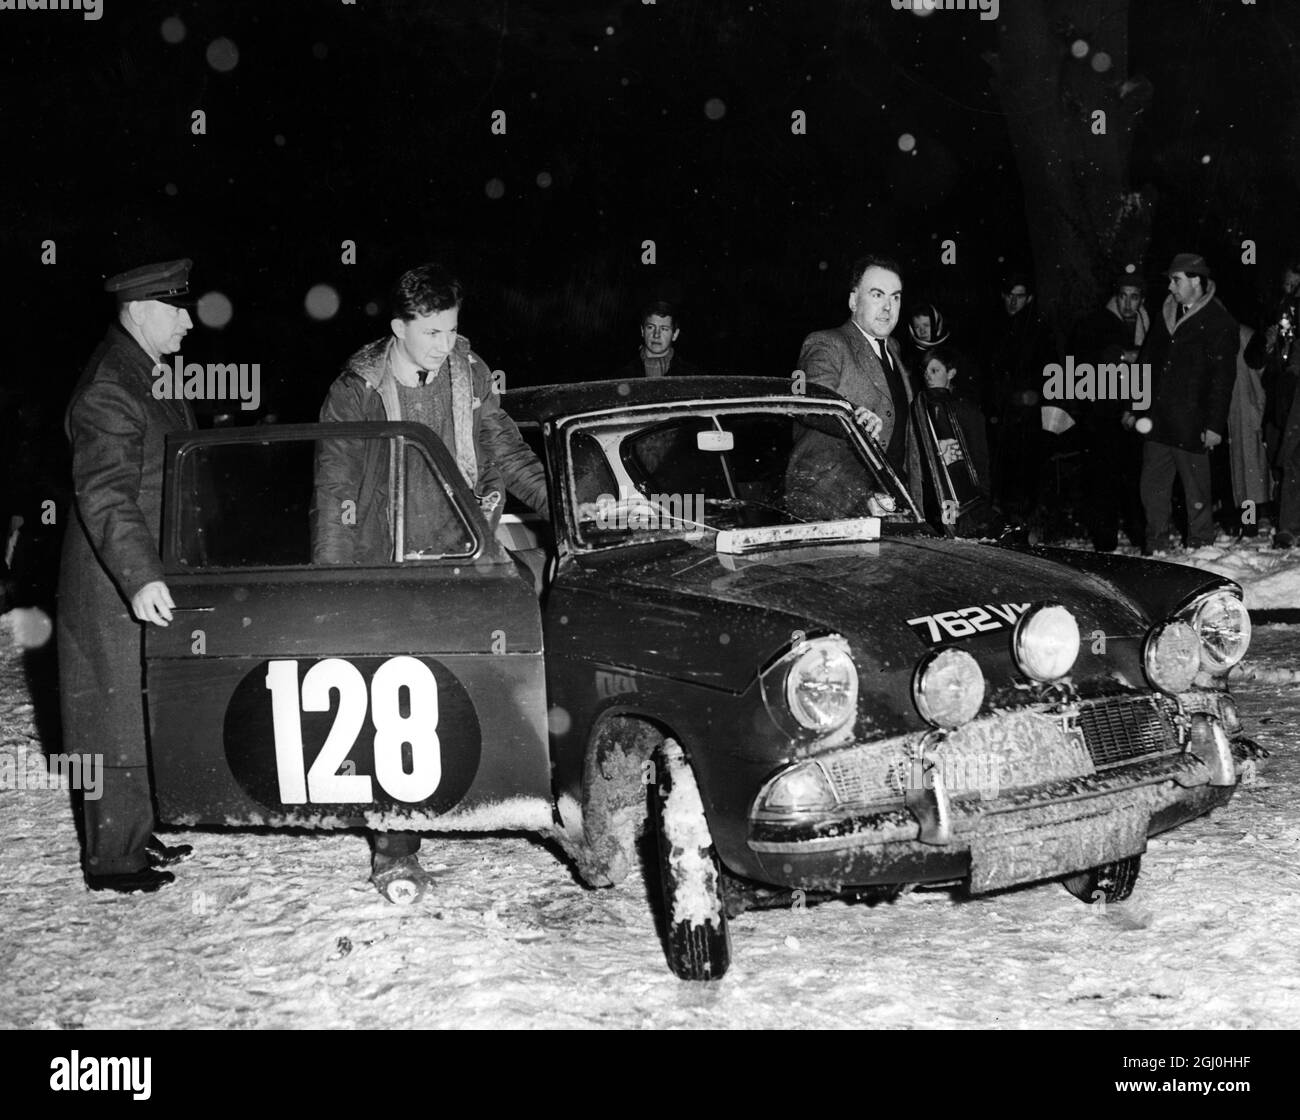 Arrivals at the passage control point at East Grinstead Sussex (The Old Felbridge Hotel) of competitors in the Monte Carlo Rally. Peter Fitzgerald the first arrival at East Grinstead, steps from his Ford on arrival. 19th January 1963 Stock Photo